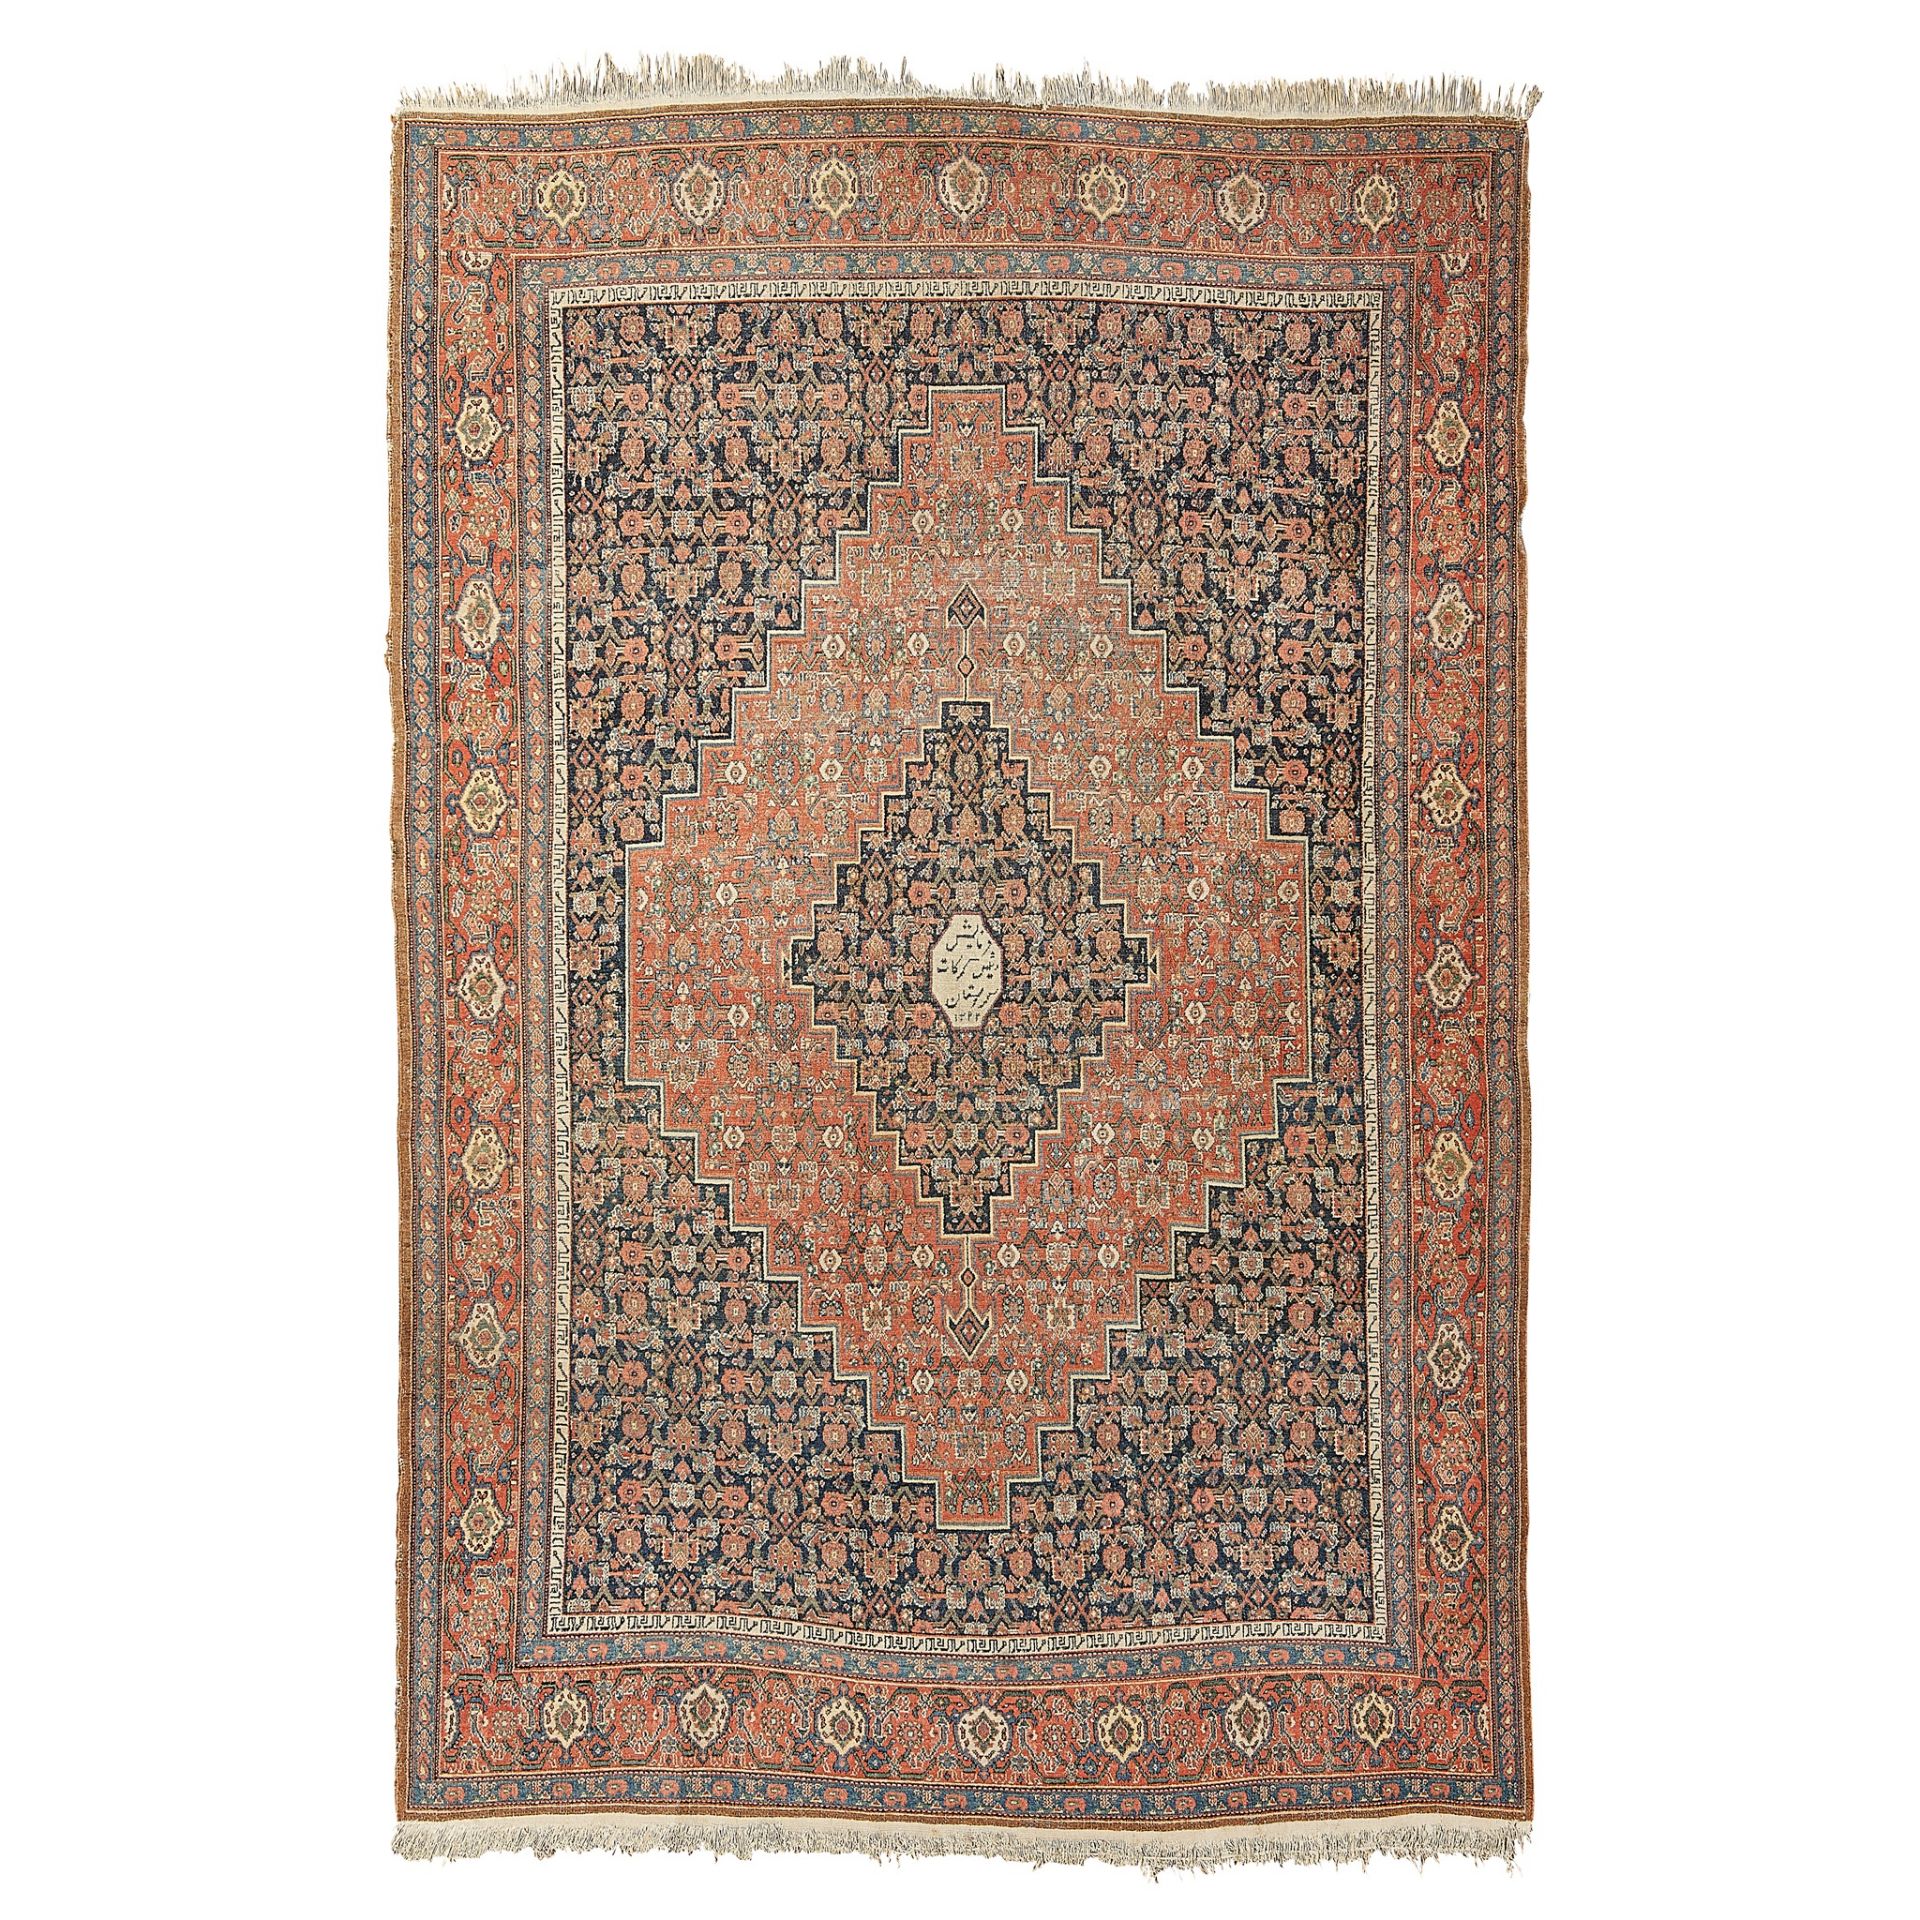 FEREGHAN CARPET WEST PERSIA, DATED POSSIBLY AH 1292 / 1876 AD